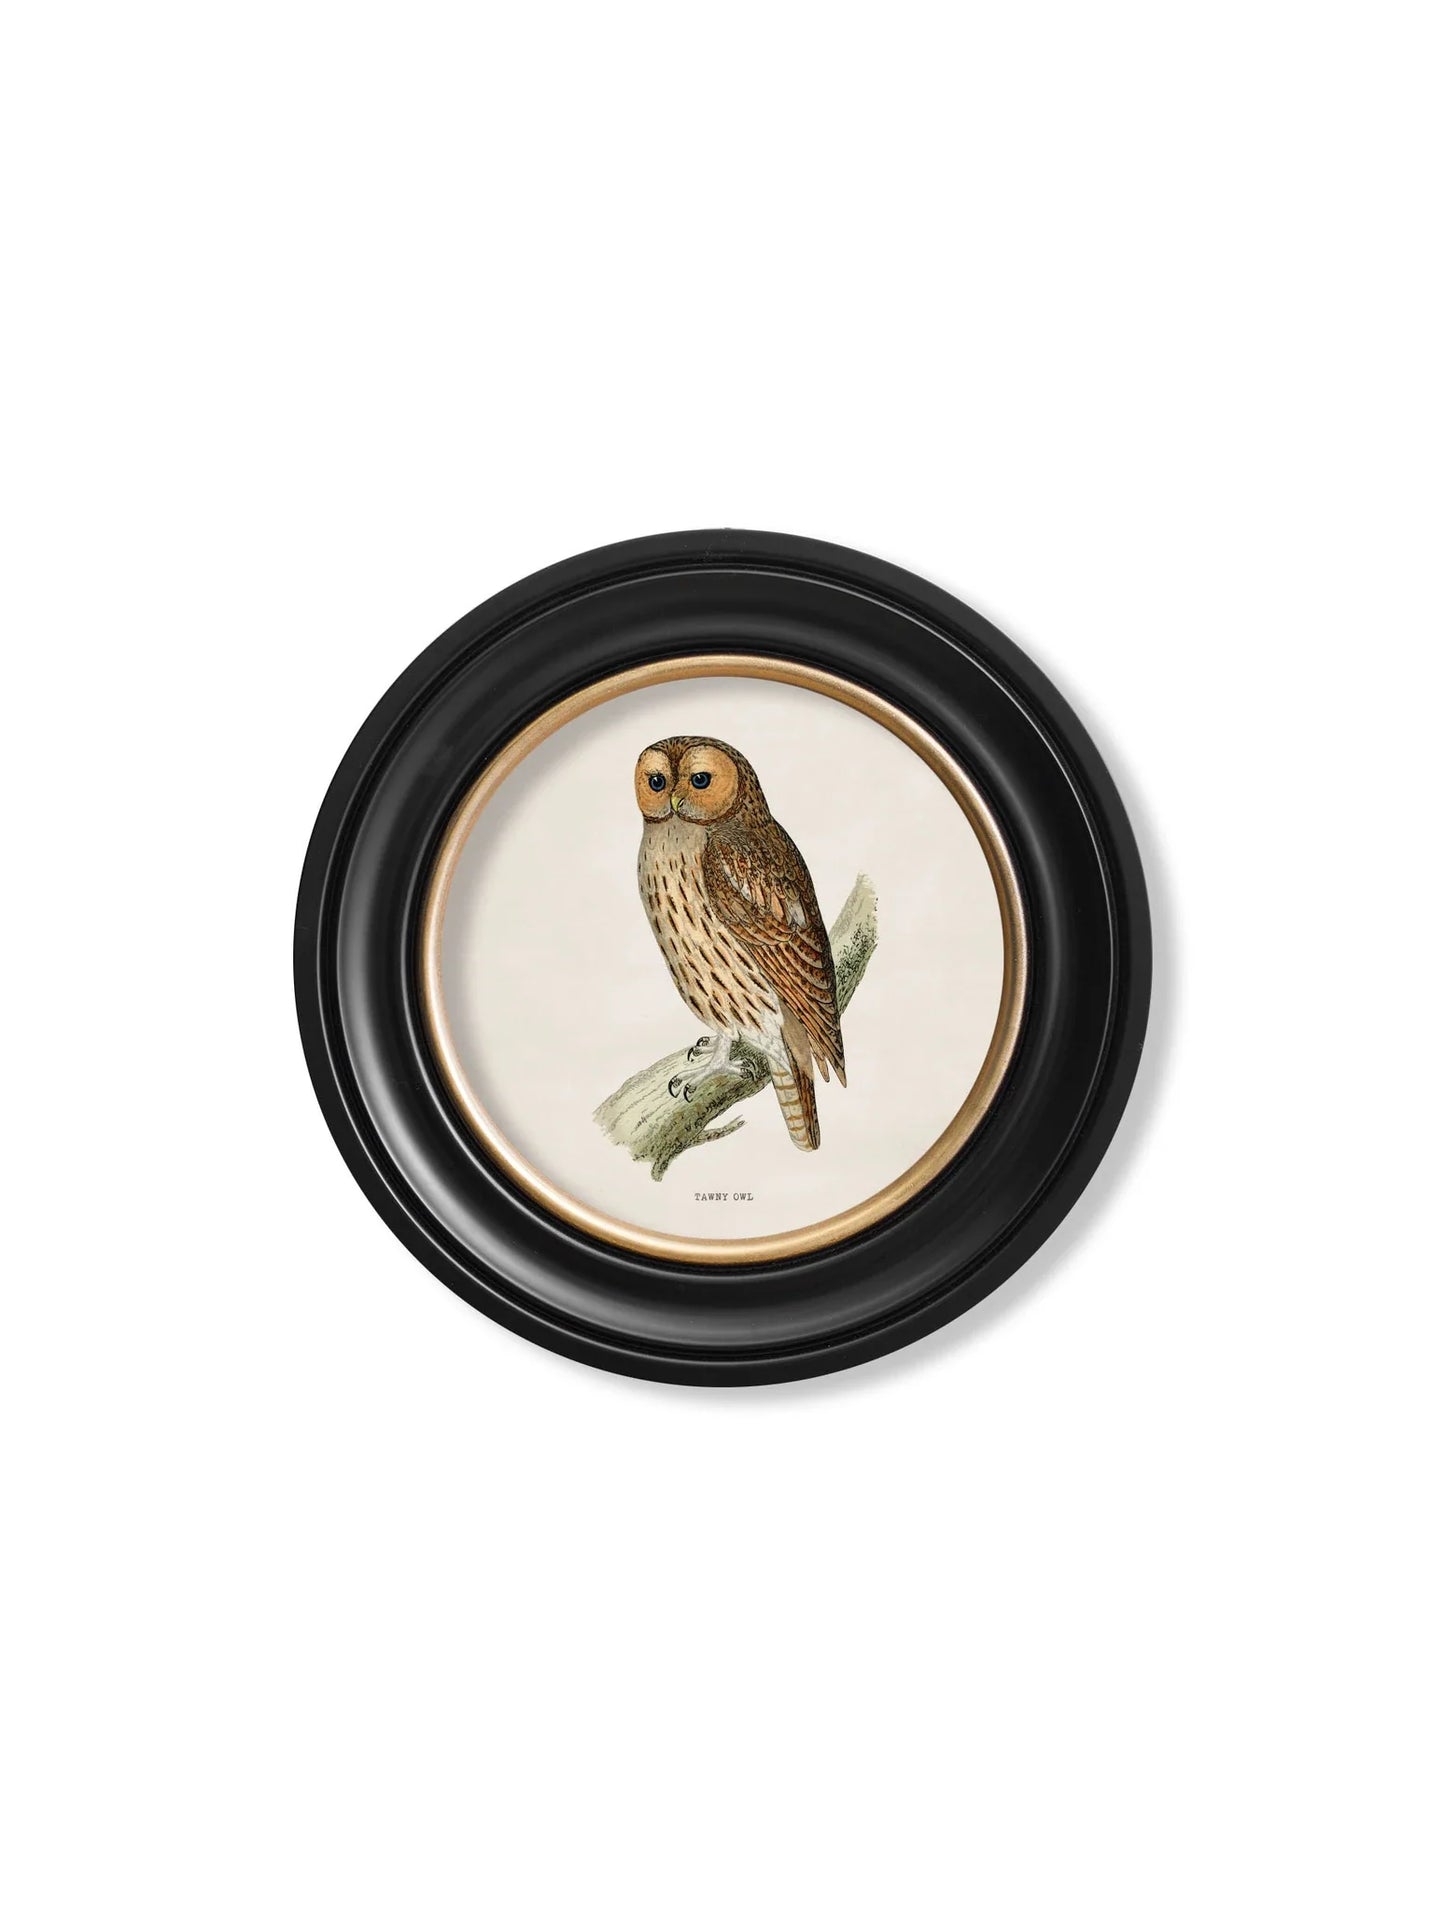 C.1870 British Owls in Round Frames for sale - Woodcock and Cavendish